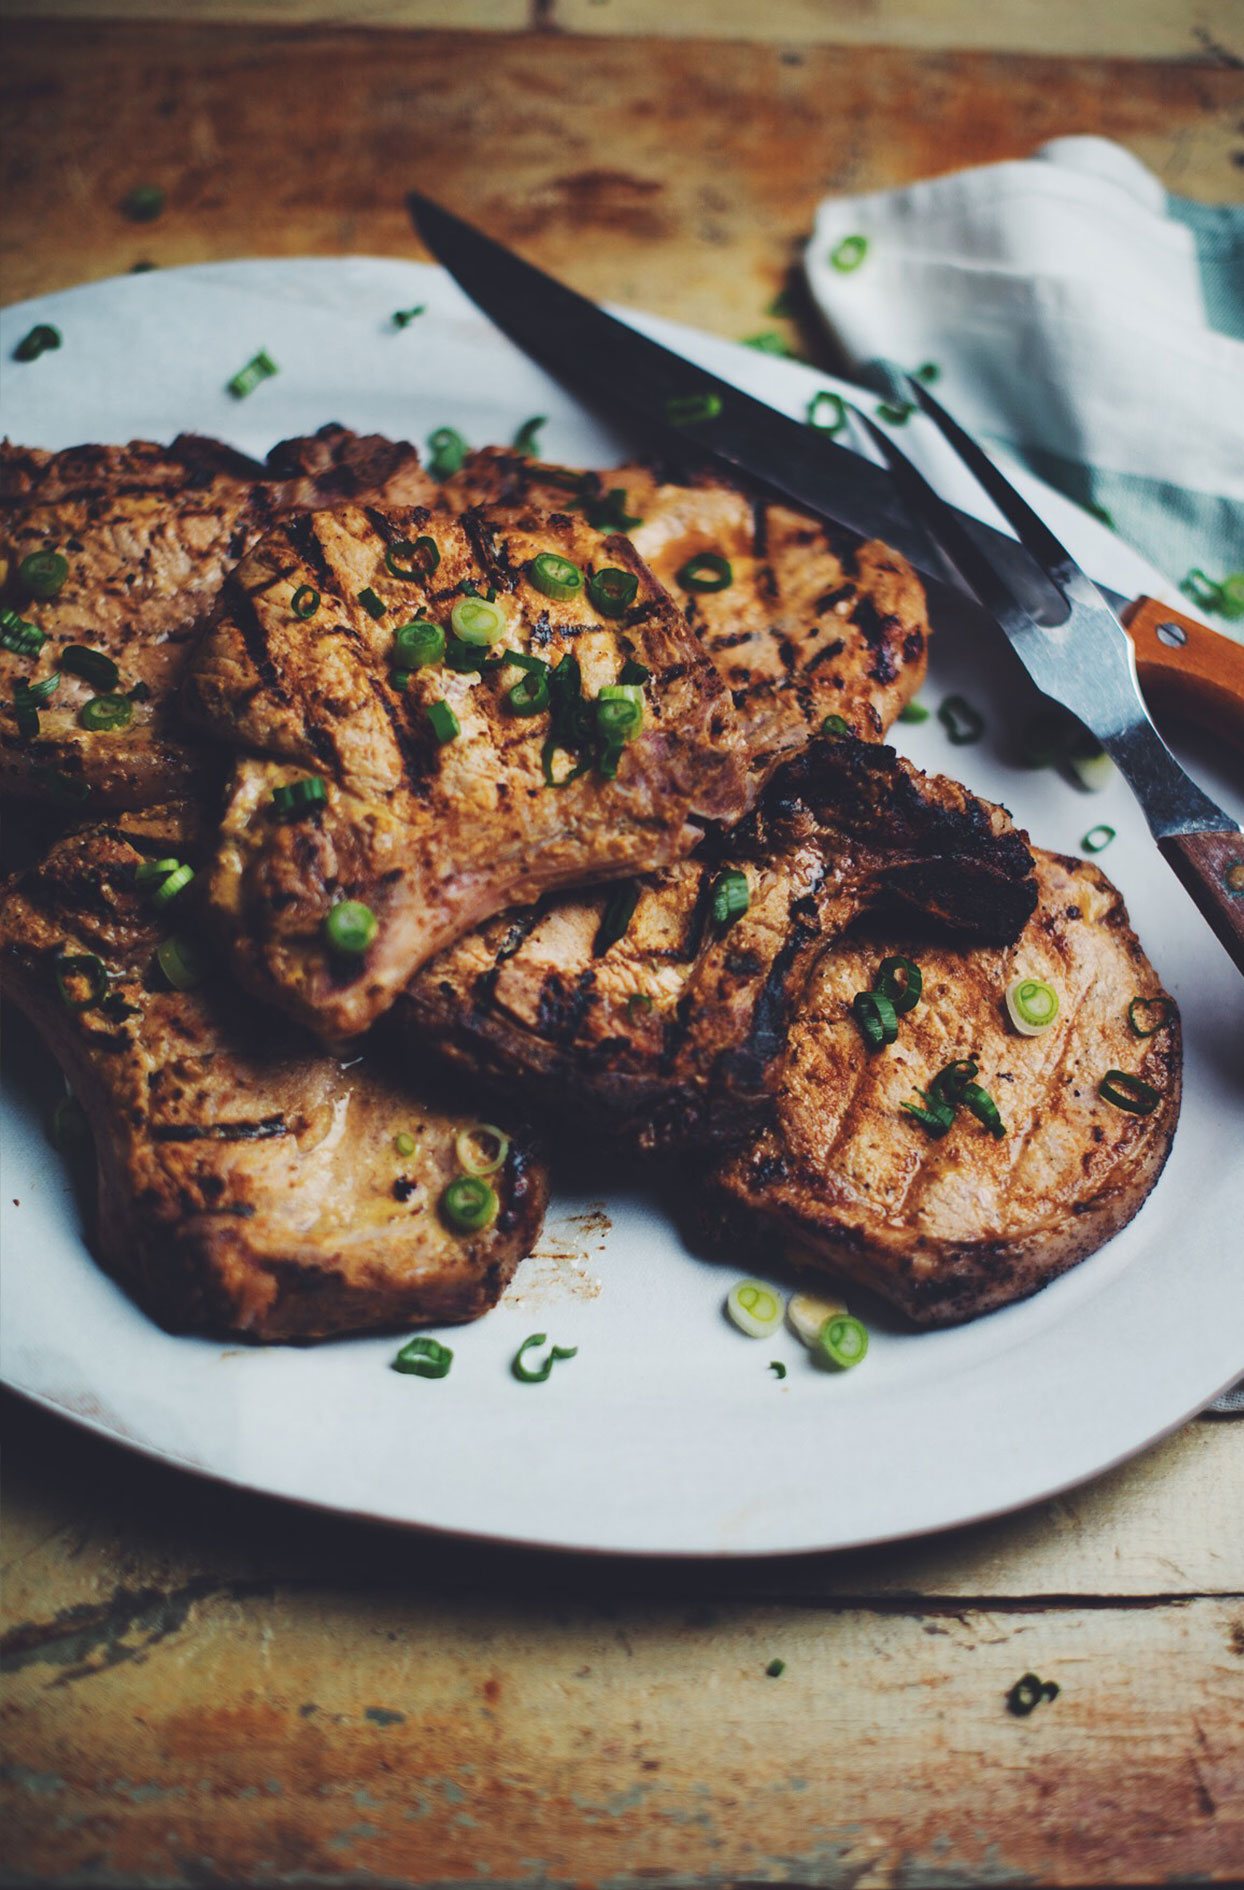 Pork chops with Dijon mustard and Blonde de Chambly beer